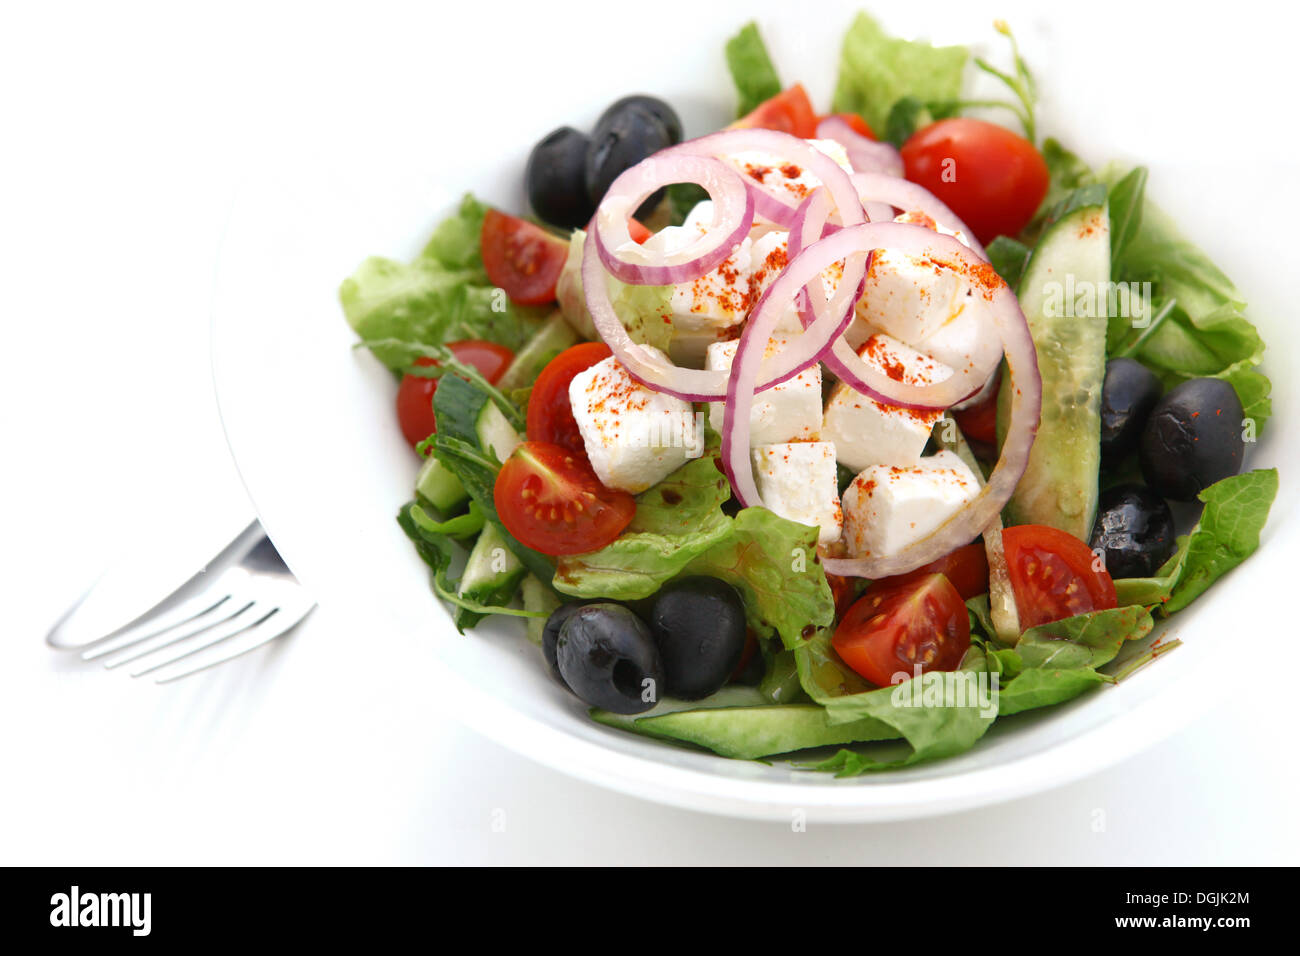 Greek Salad with Feta Cheese tomatoes, cucumbers, lettuce, peppers and black olives Stock Photo